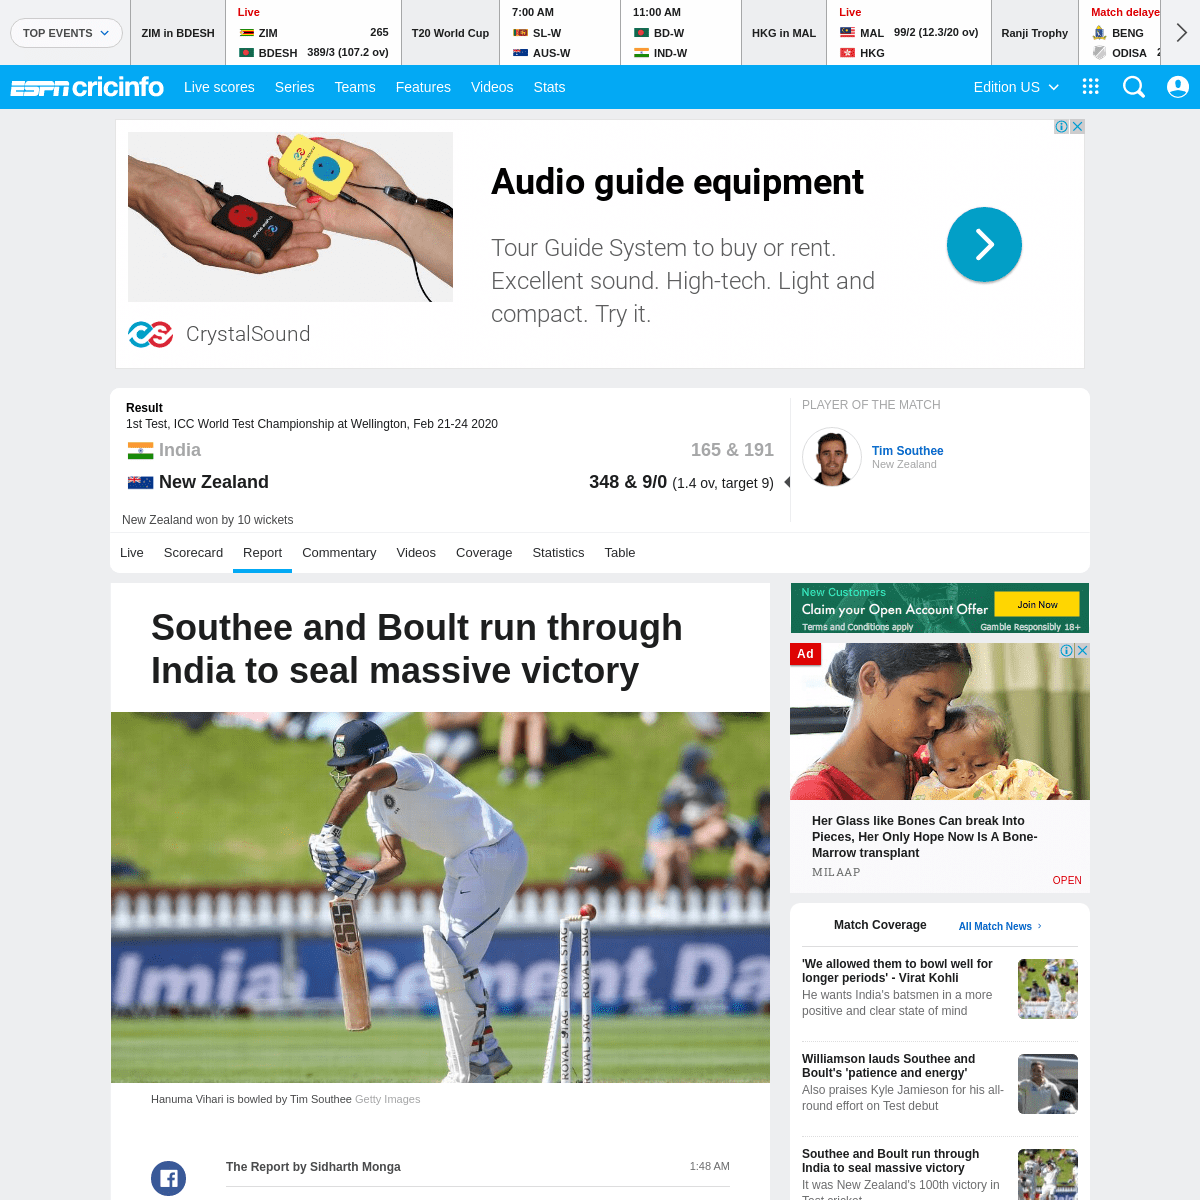 A complete backup of www.espncricinfo.com/series/19430/report/1187685/new-zealand-vs-india-1st-test-icc-world-test-championship